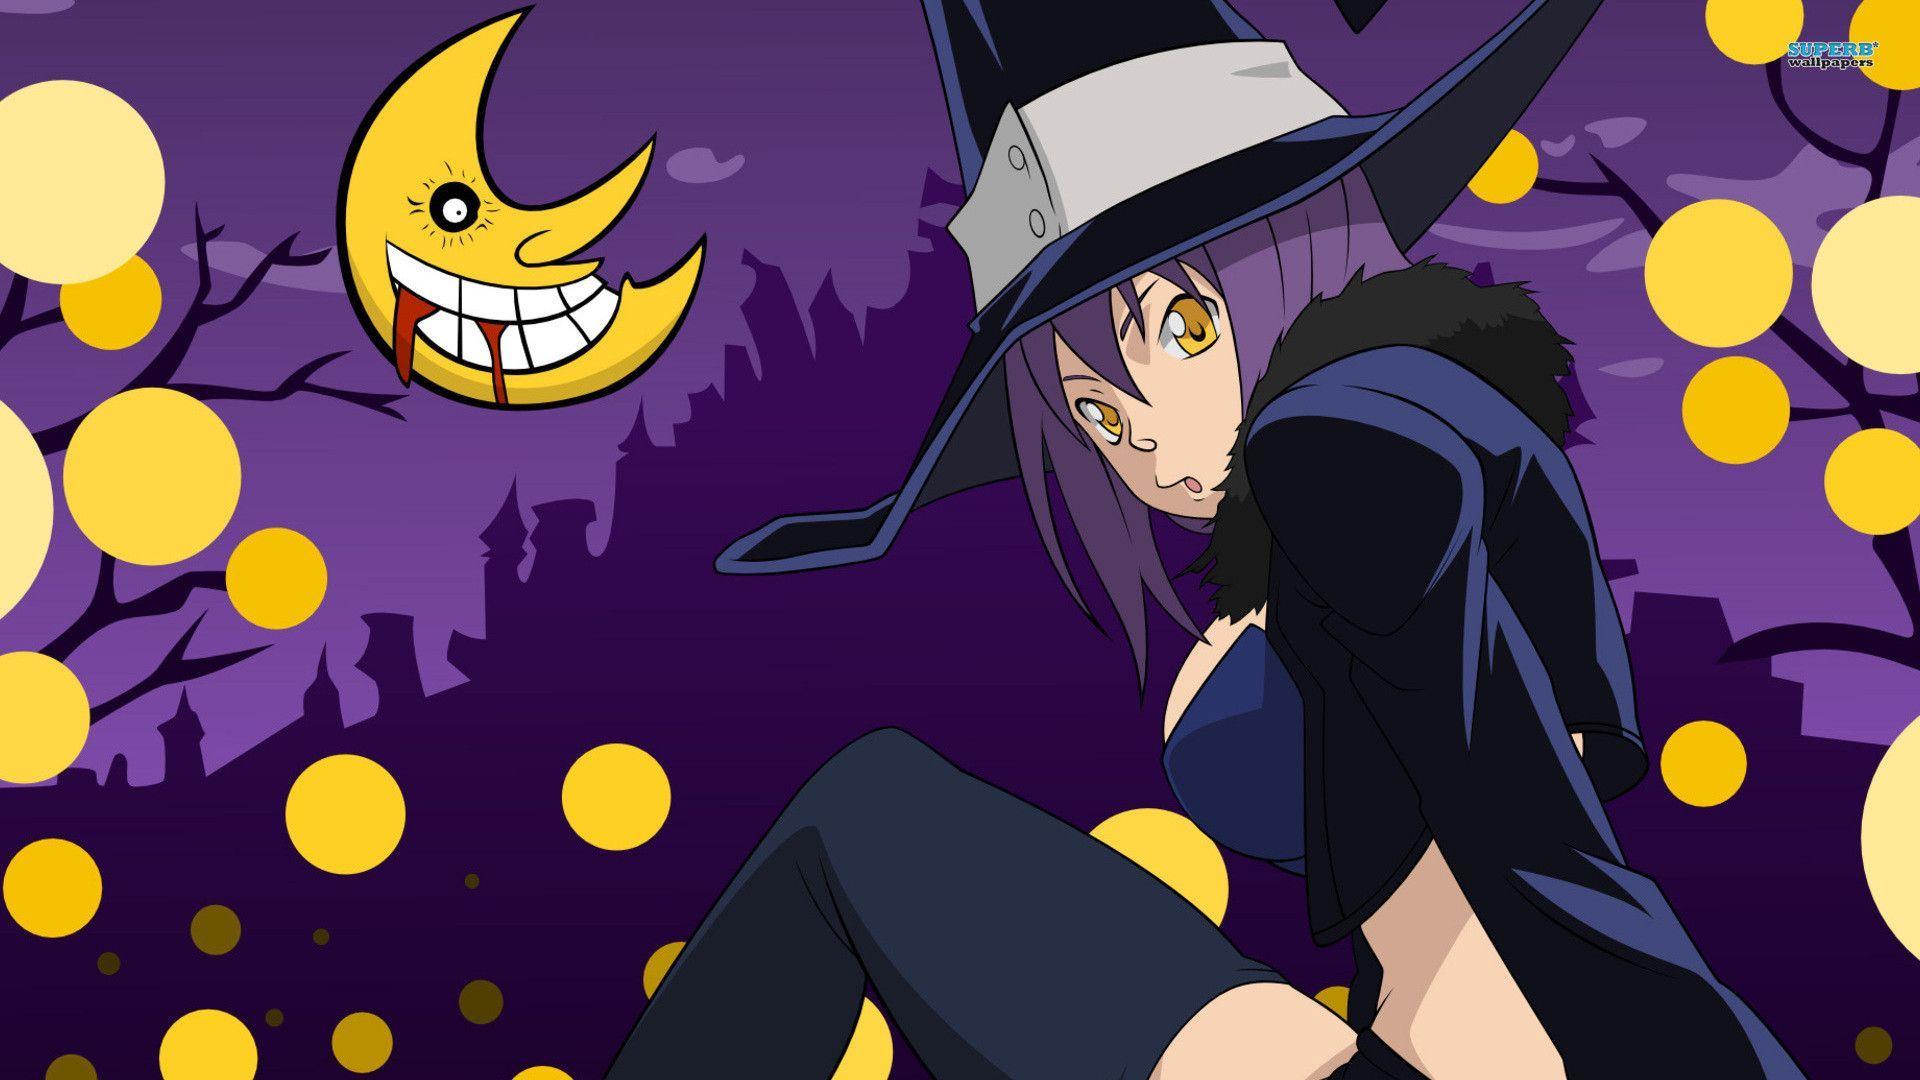 Soul Eater Wallpapers HD - Wallpaper Cave